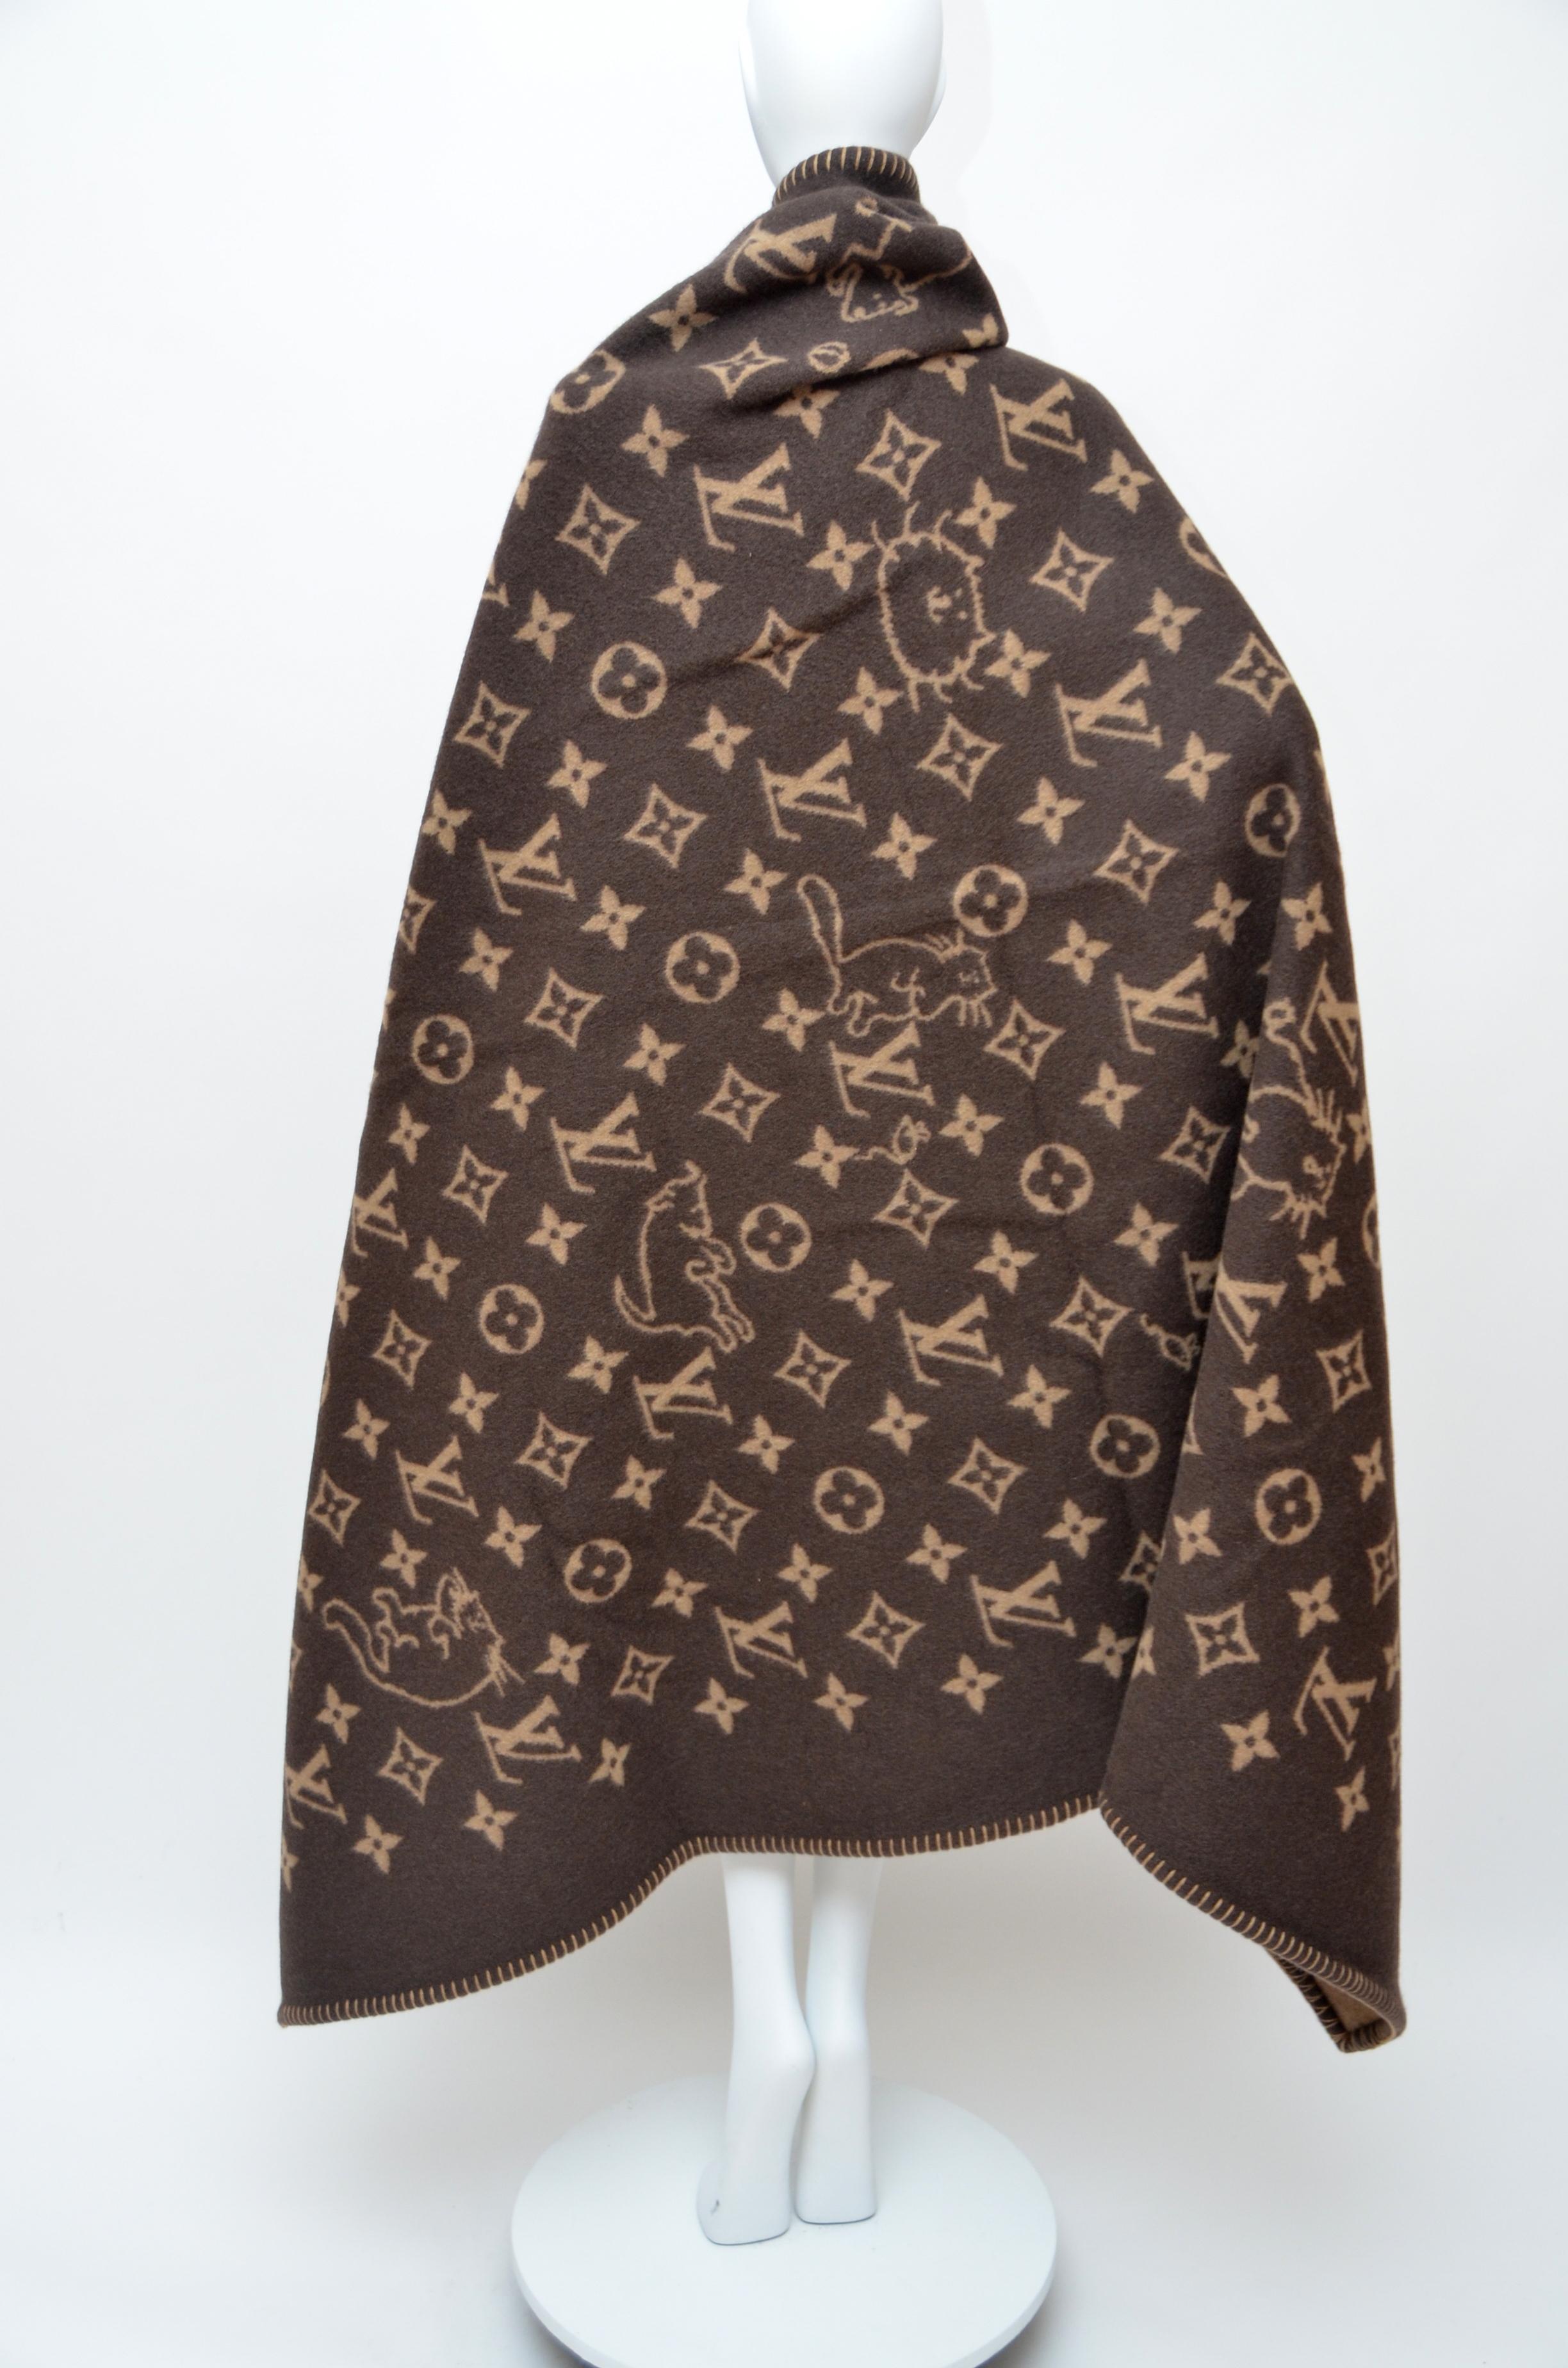 Louis Vuitton X Grace Coddington Catogram Classic Blanket
For this collaboration, Nicolas Ghesquière and renowned stylist Grace Coddington. Introduced in the Cruise 2019 Collection, the Catogram story mixes the iconic Louis Vuitton Monogram with the